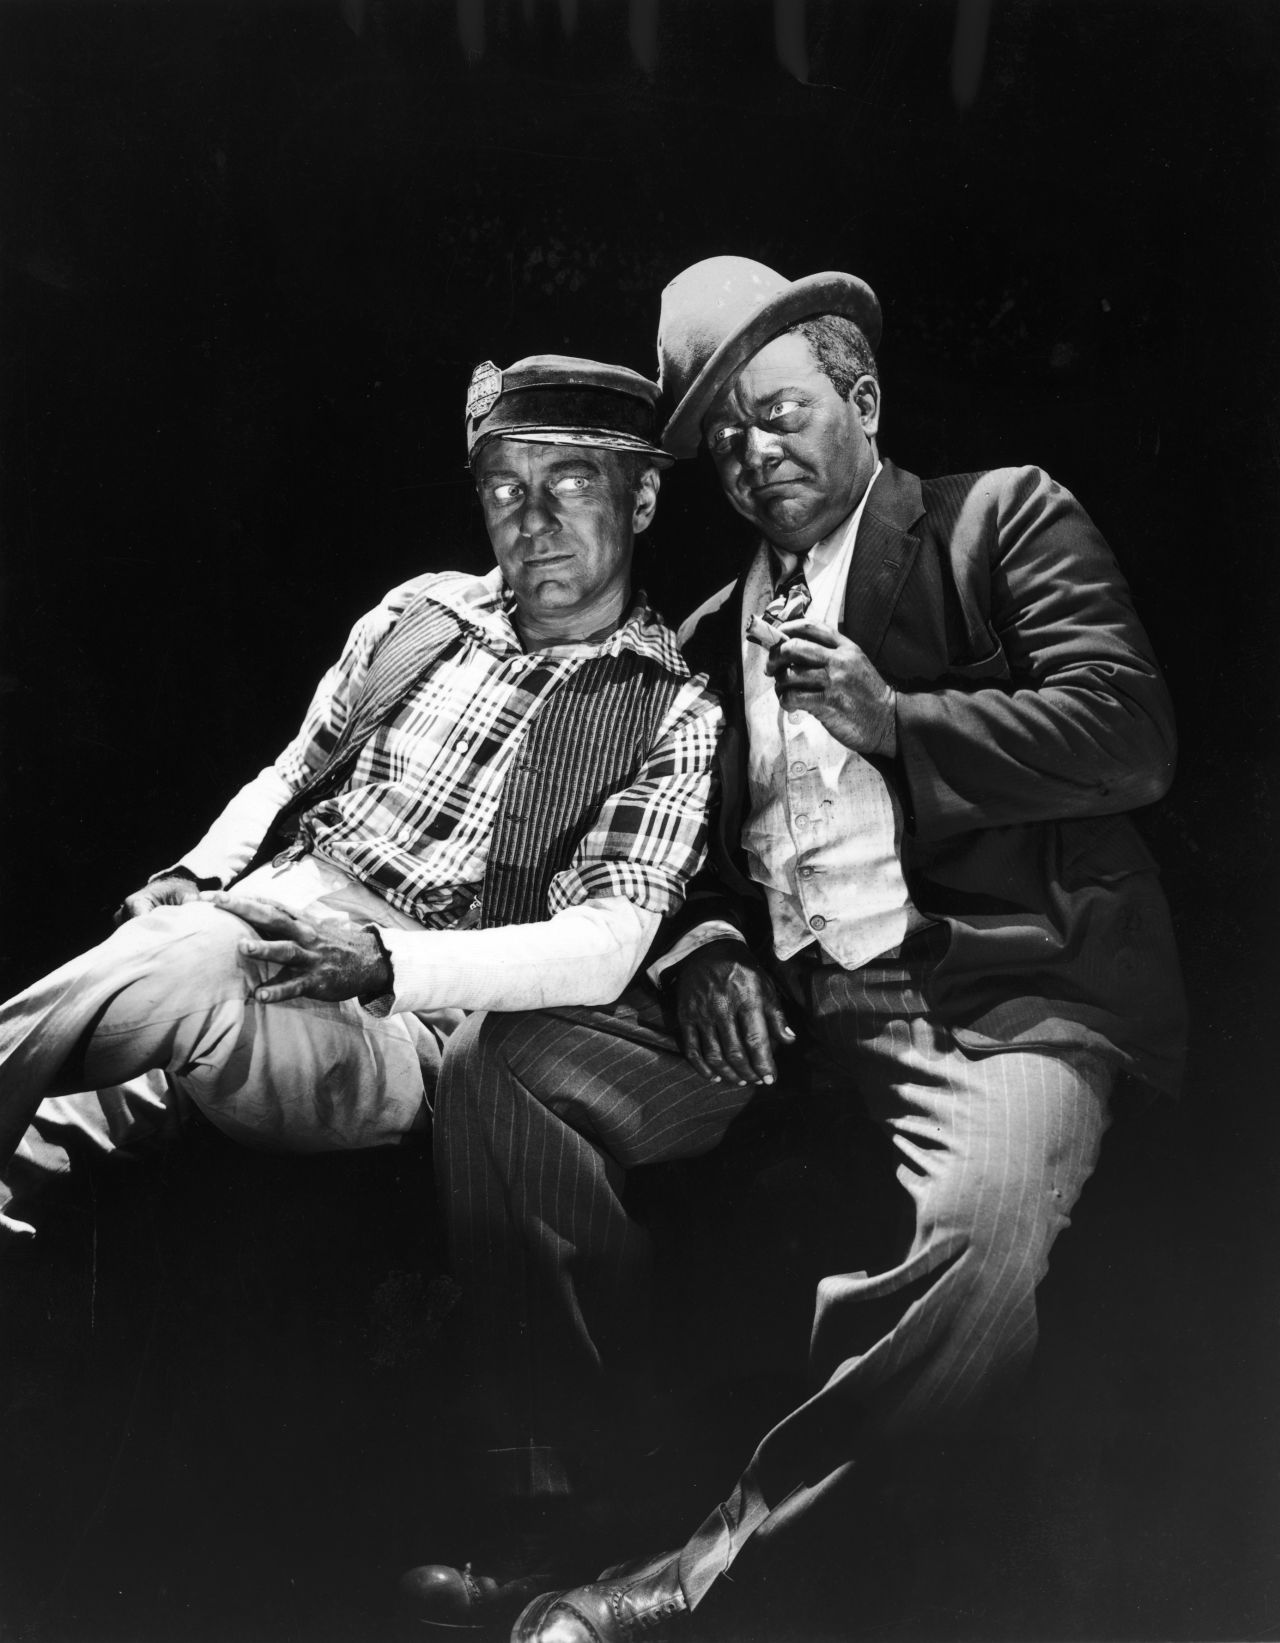 Charles Correll (left) and Freeman Gosden appear in blackface makeup in a promotional portrait for the television series "The Amos 'n' Andy Show," which was offensive to many African-Americans and others when it ran from 1951to 1953.